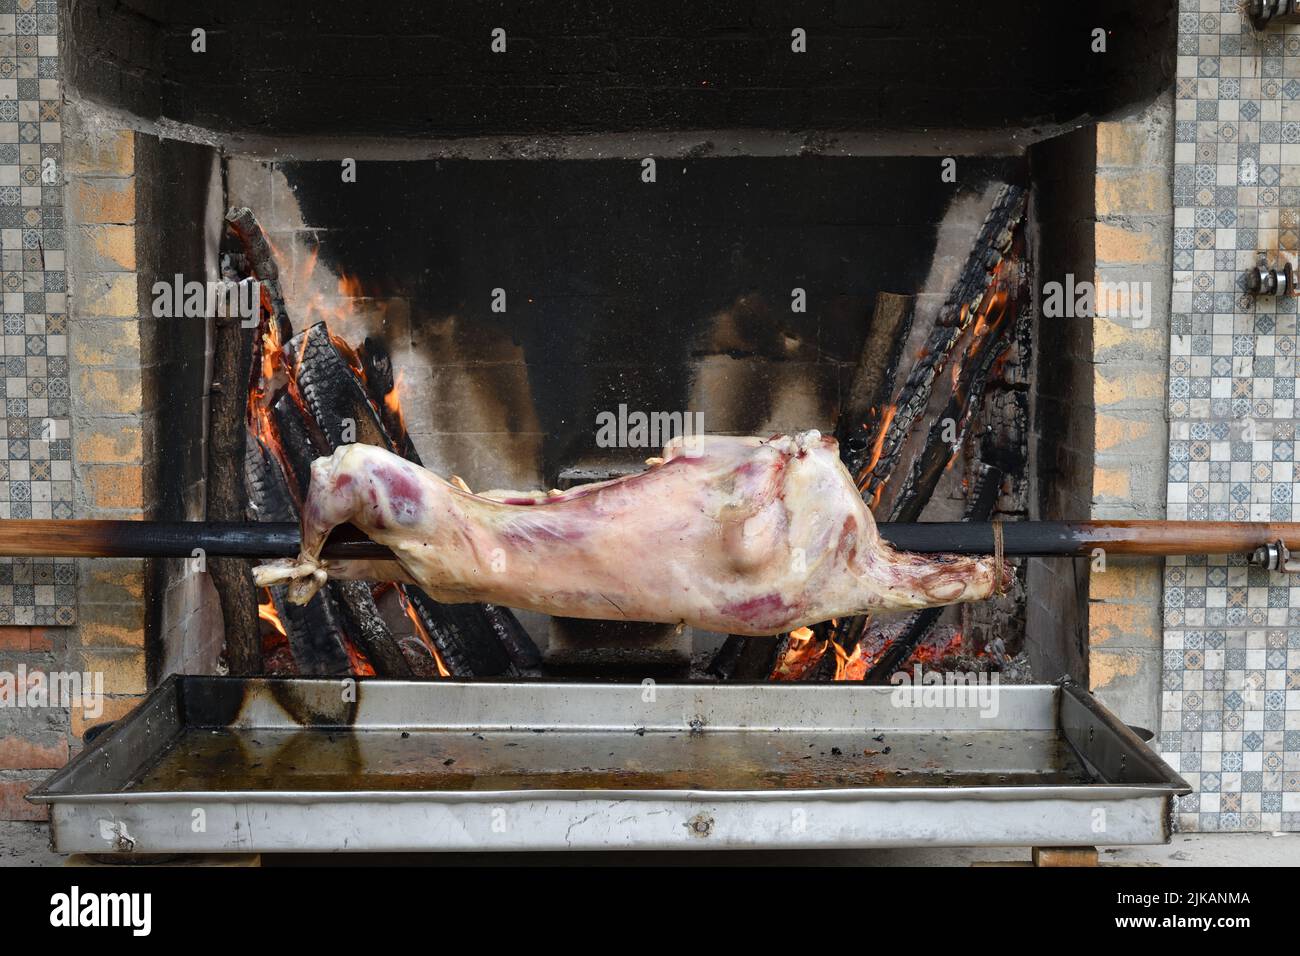 The carcass of a young sheep roasting on a spit over a low fire in oven. Roasted lamb on a spit. Kitchen in the open air. Local cuisine in Dagestan. R Stock Photo